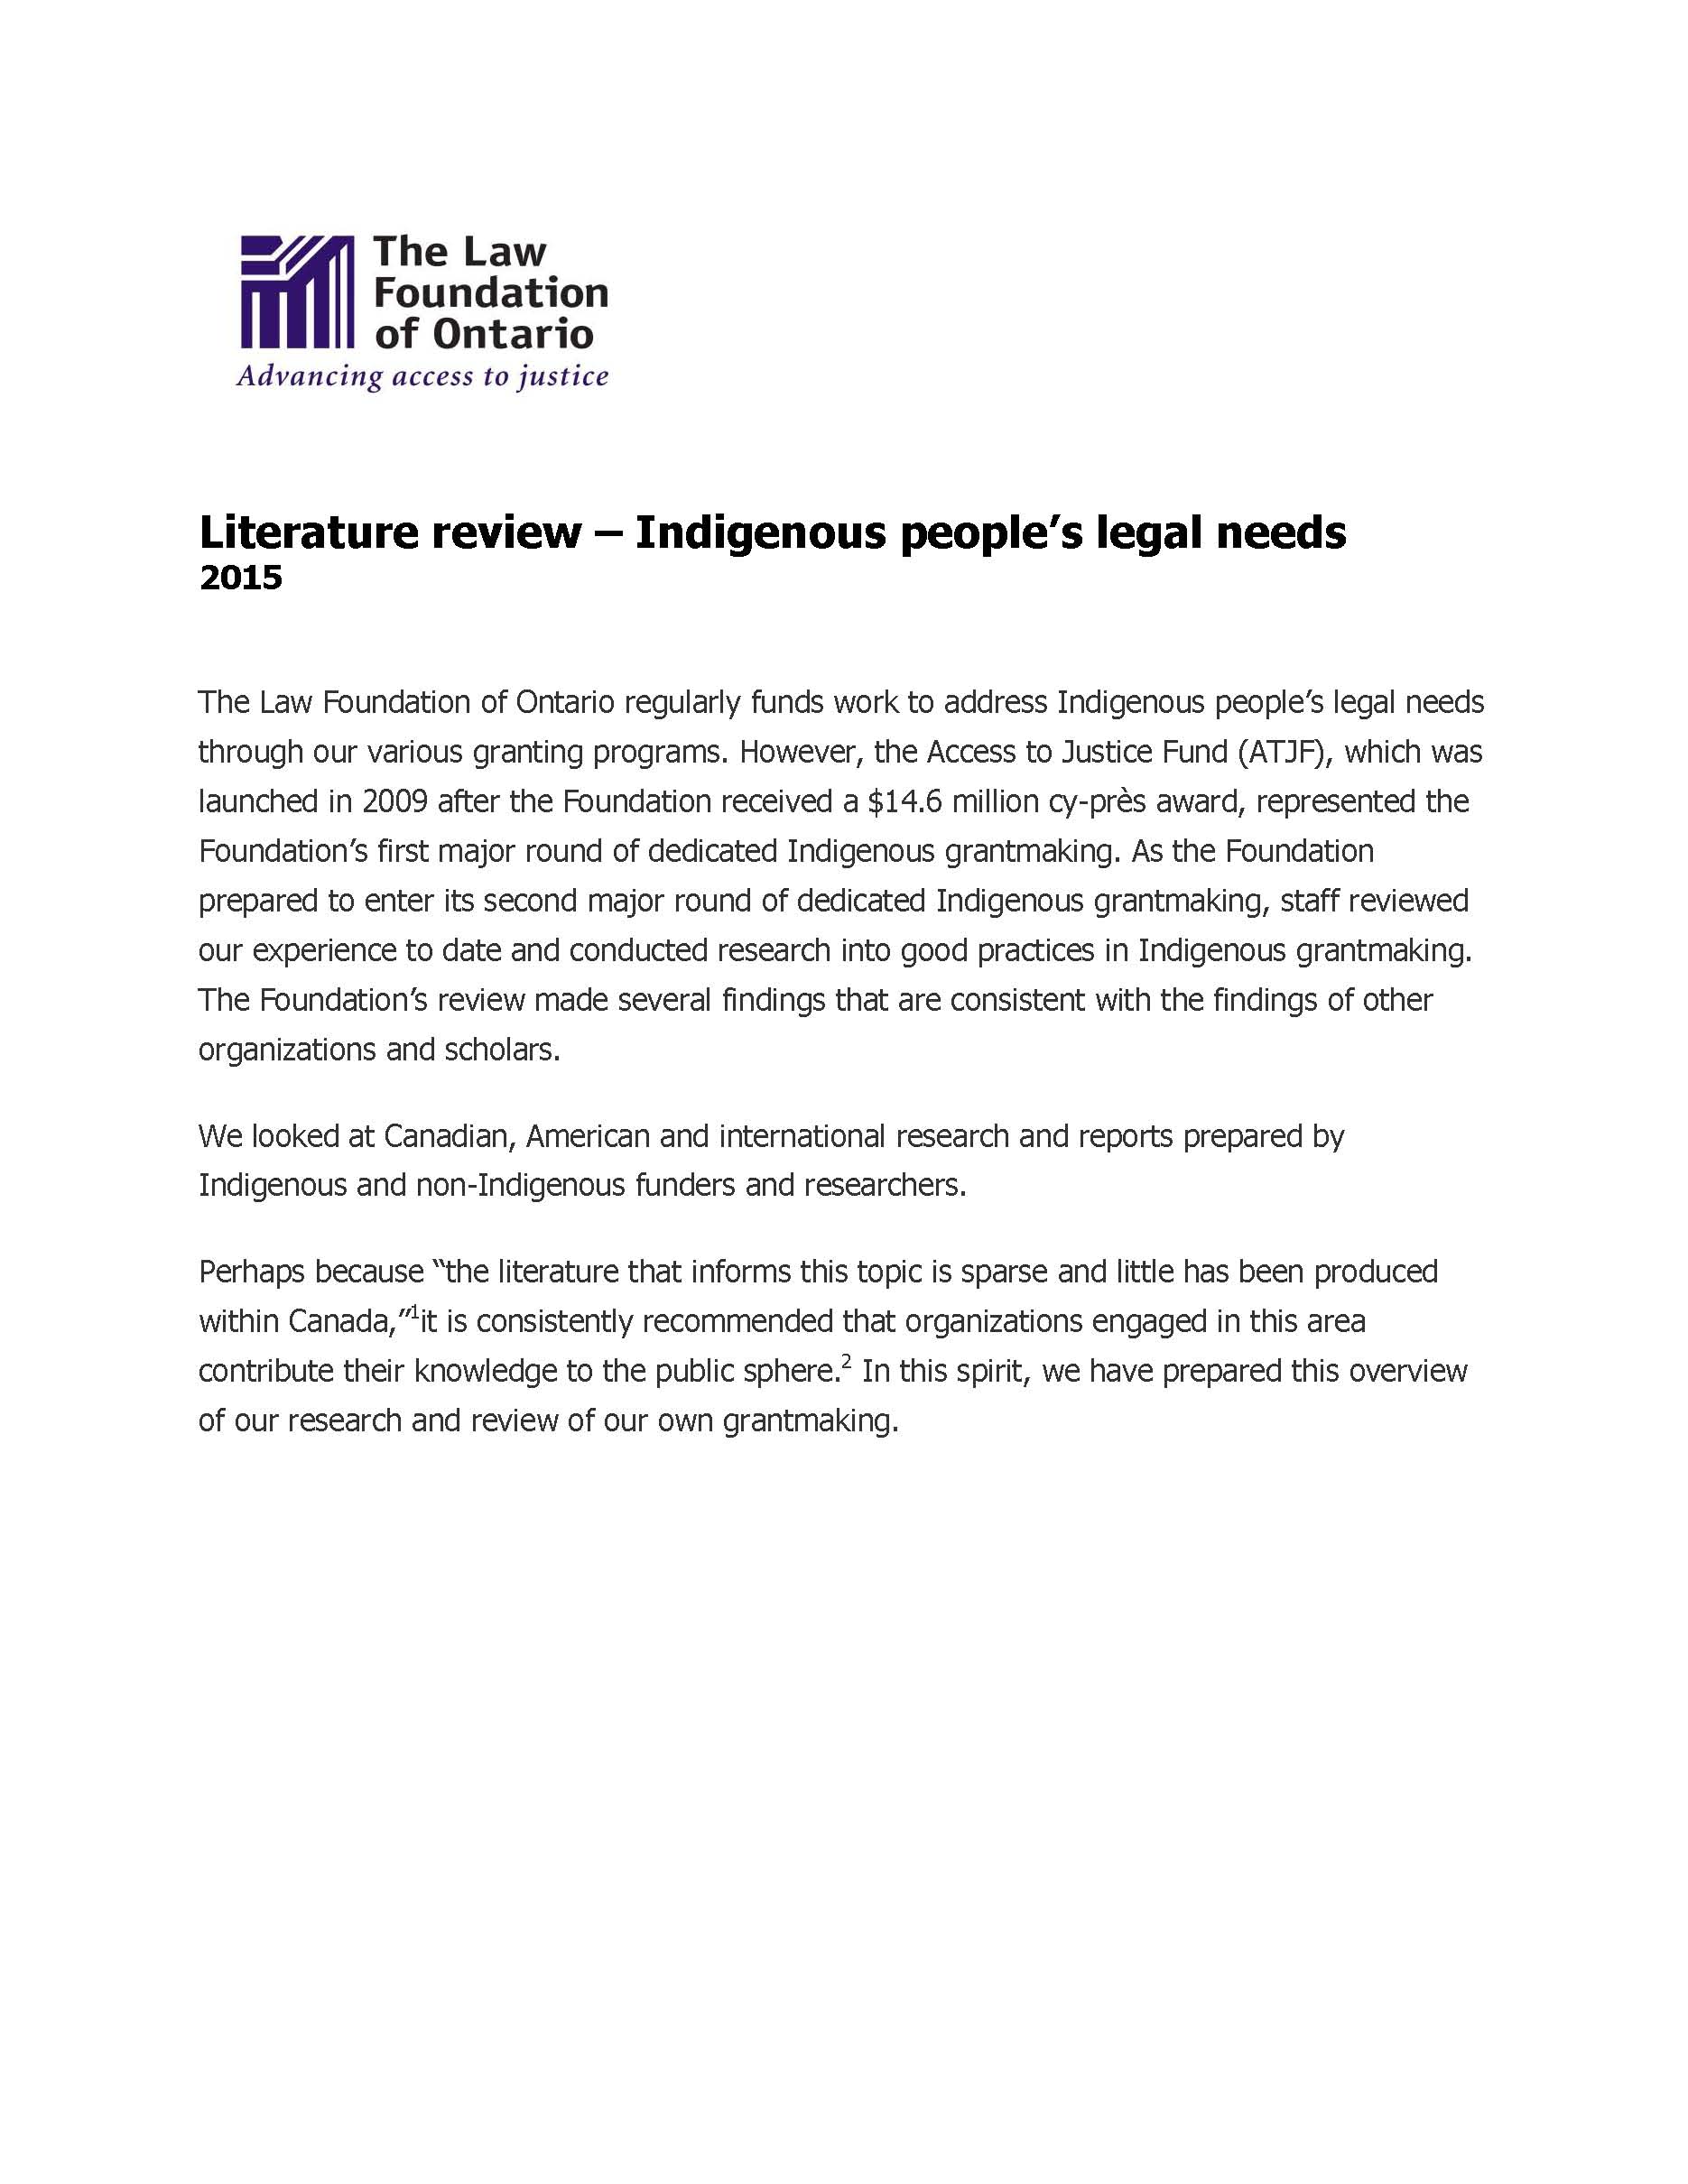 Indigenous people’s legal needs literature review